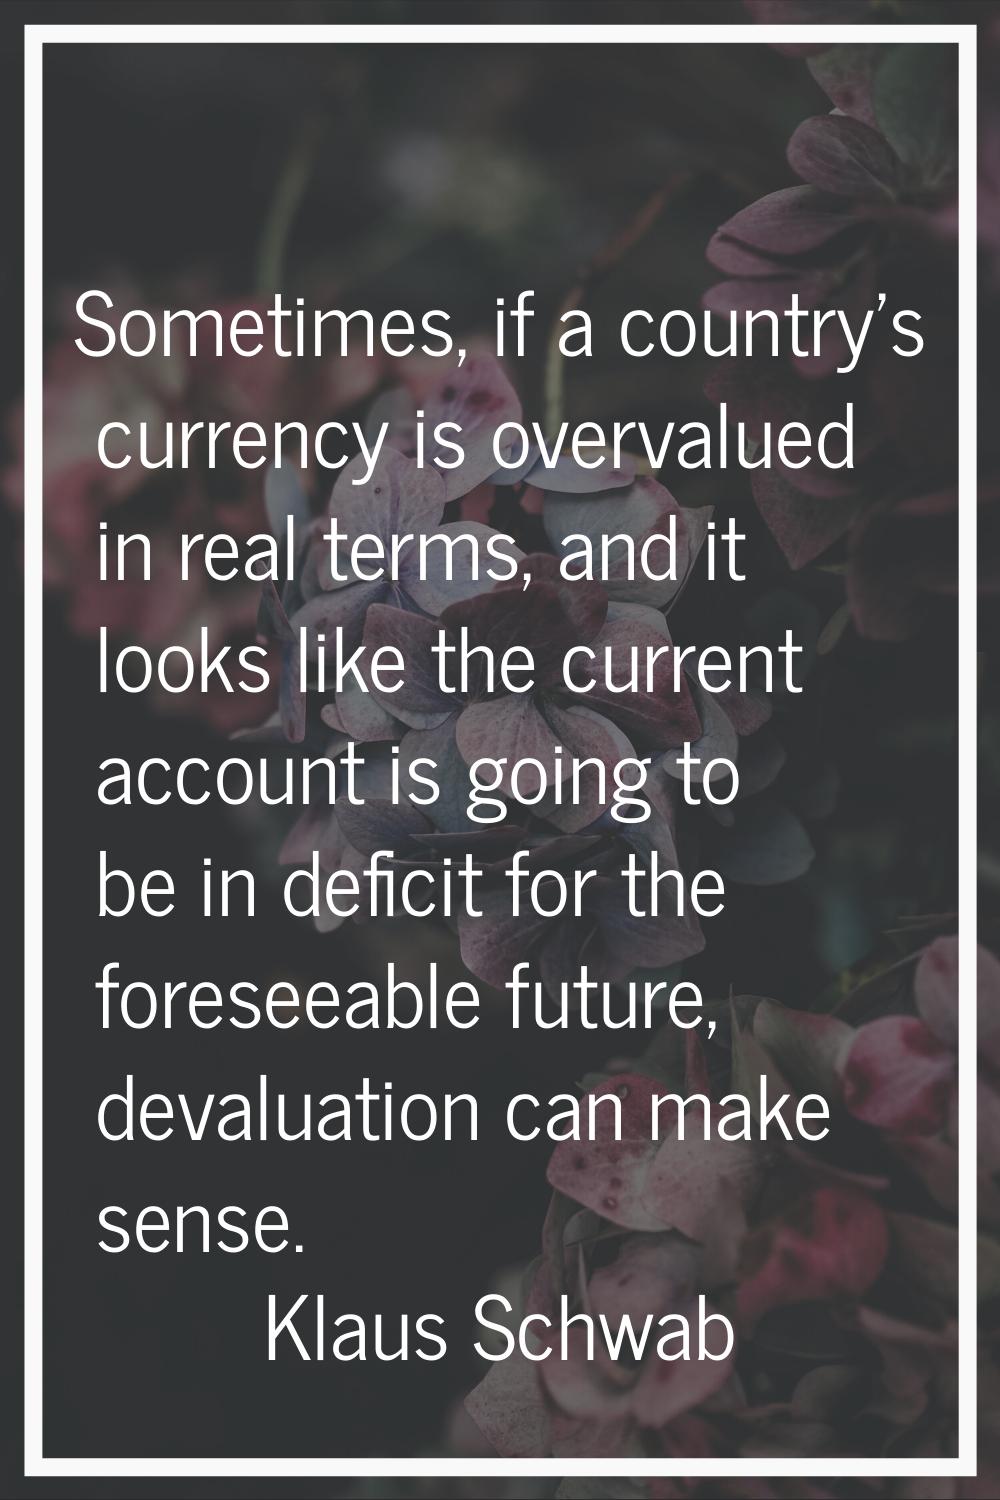 Sometimes, if a country's currency is overvalued in real terms, and it looks like the current accou